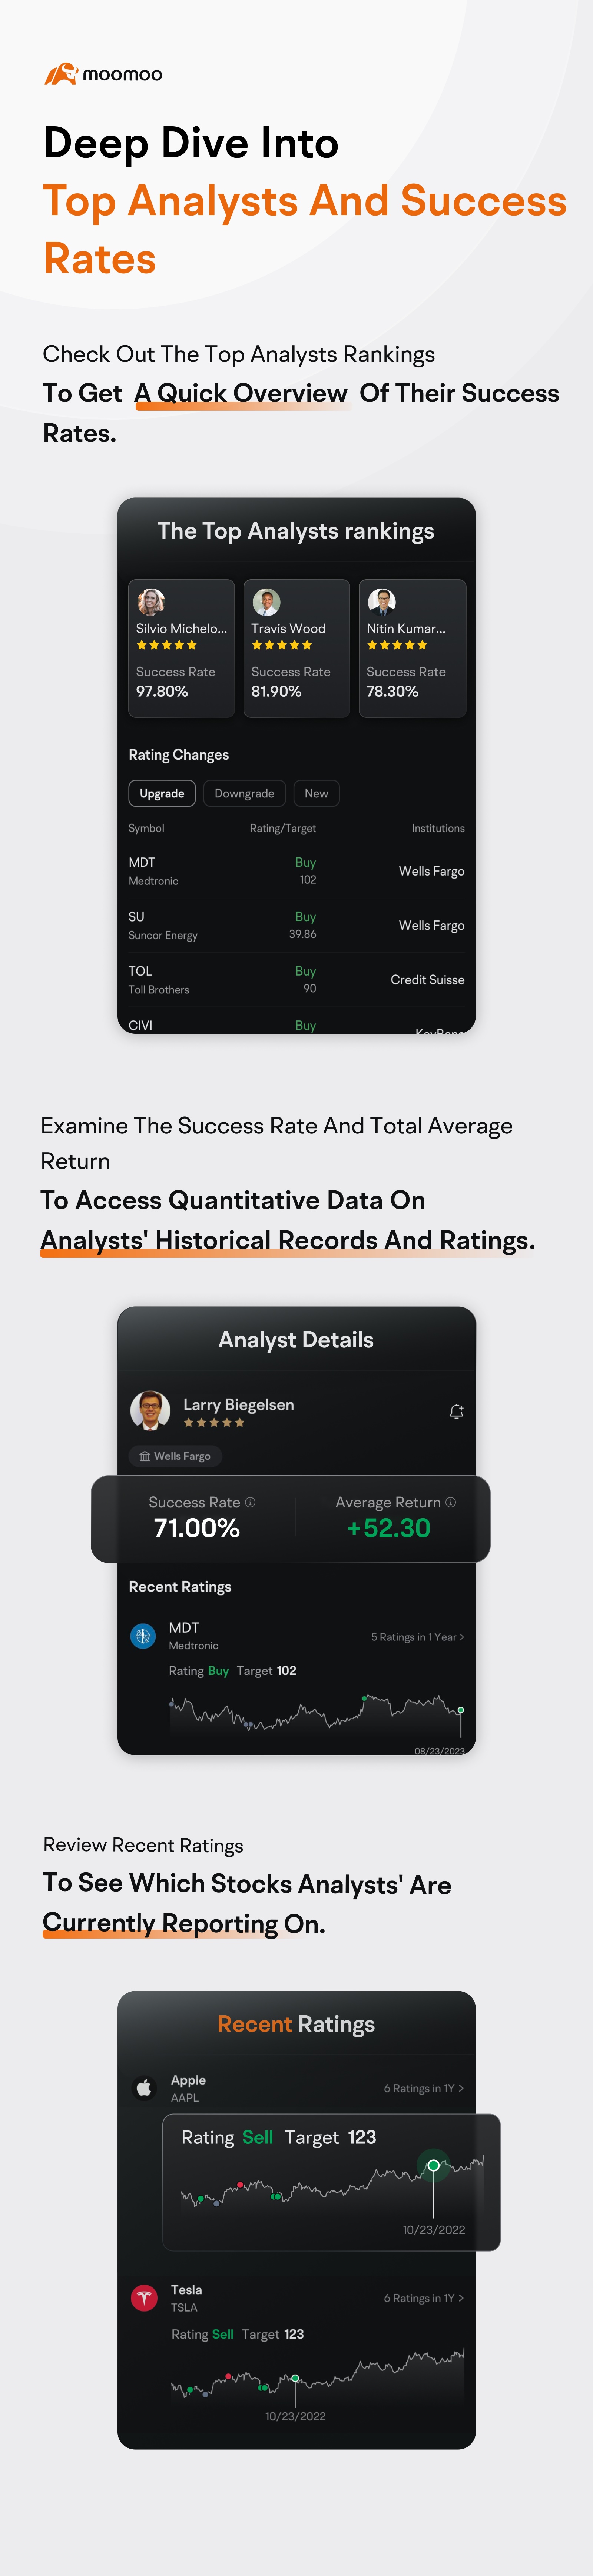 Using moomoo's Analyst Ratings during turbulent stock markets